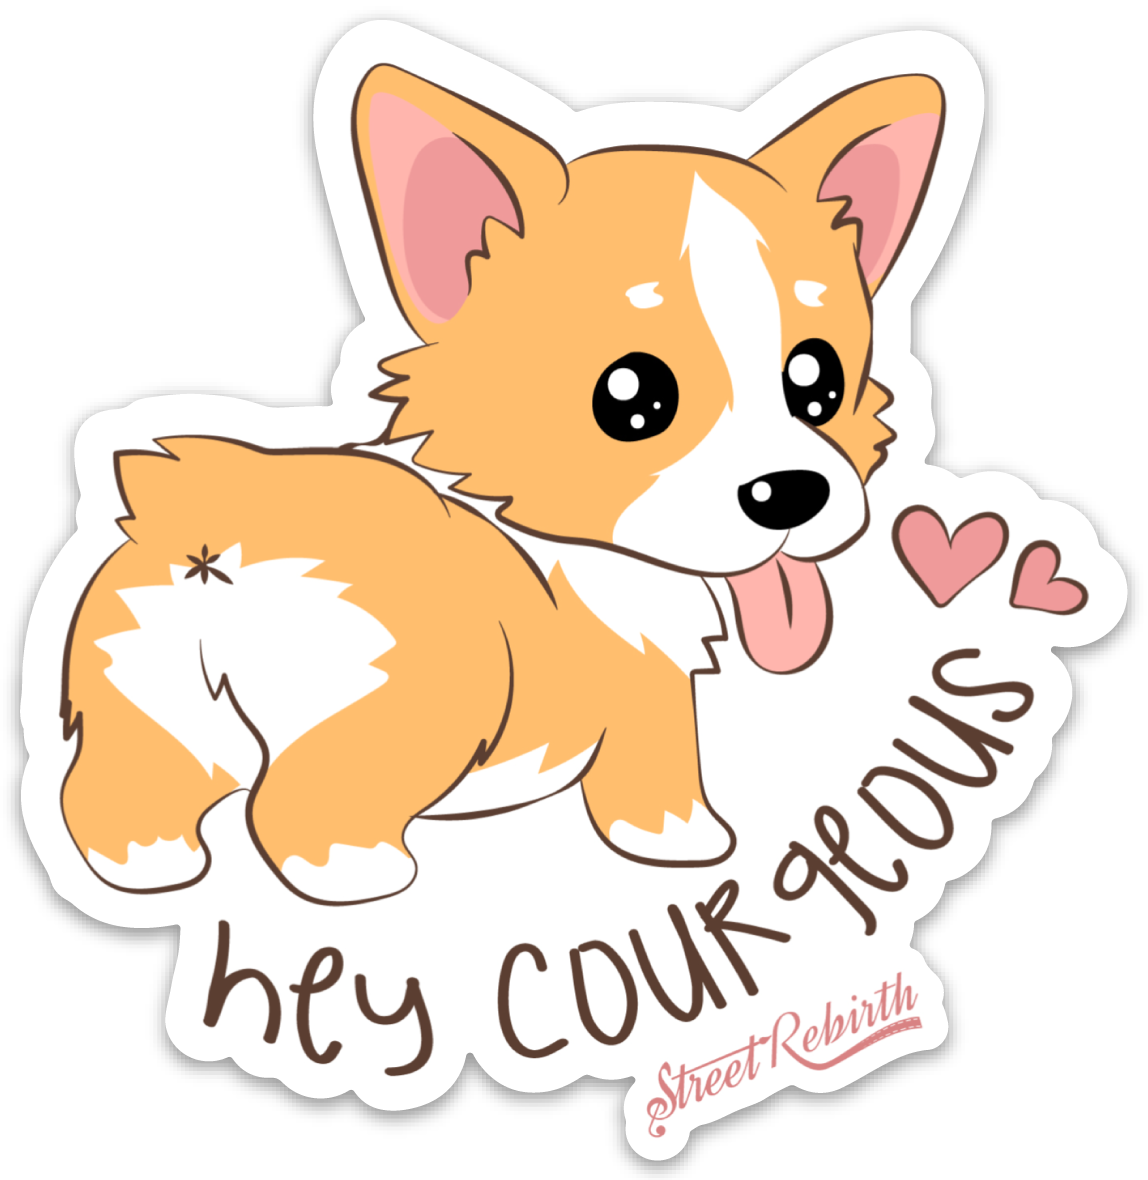 Hey Courageous PUN STICKER – ONE 4 INCH WATER PROOF VINYL STICKER – FOR HYDRO FLASK, SKATEBOARD, LAPTOP, PLANNER, CAR, COLLECTING, GIFTING